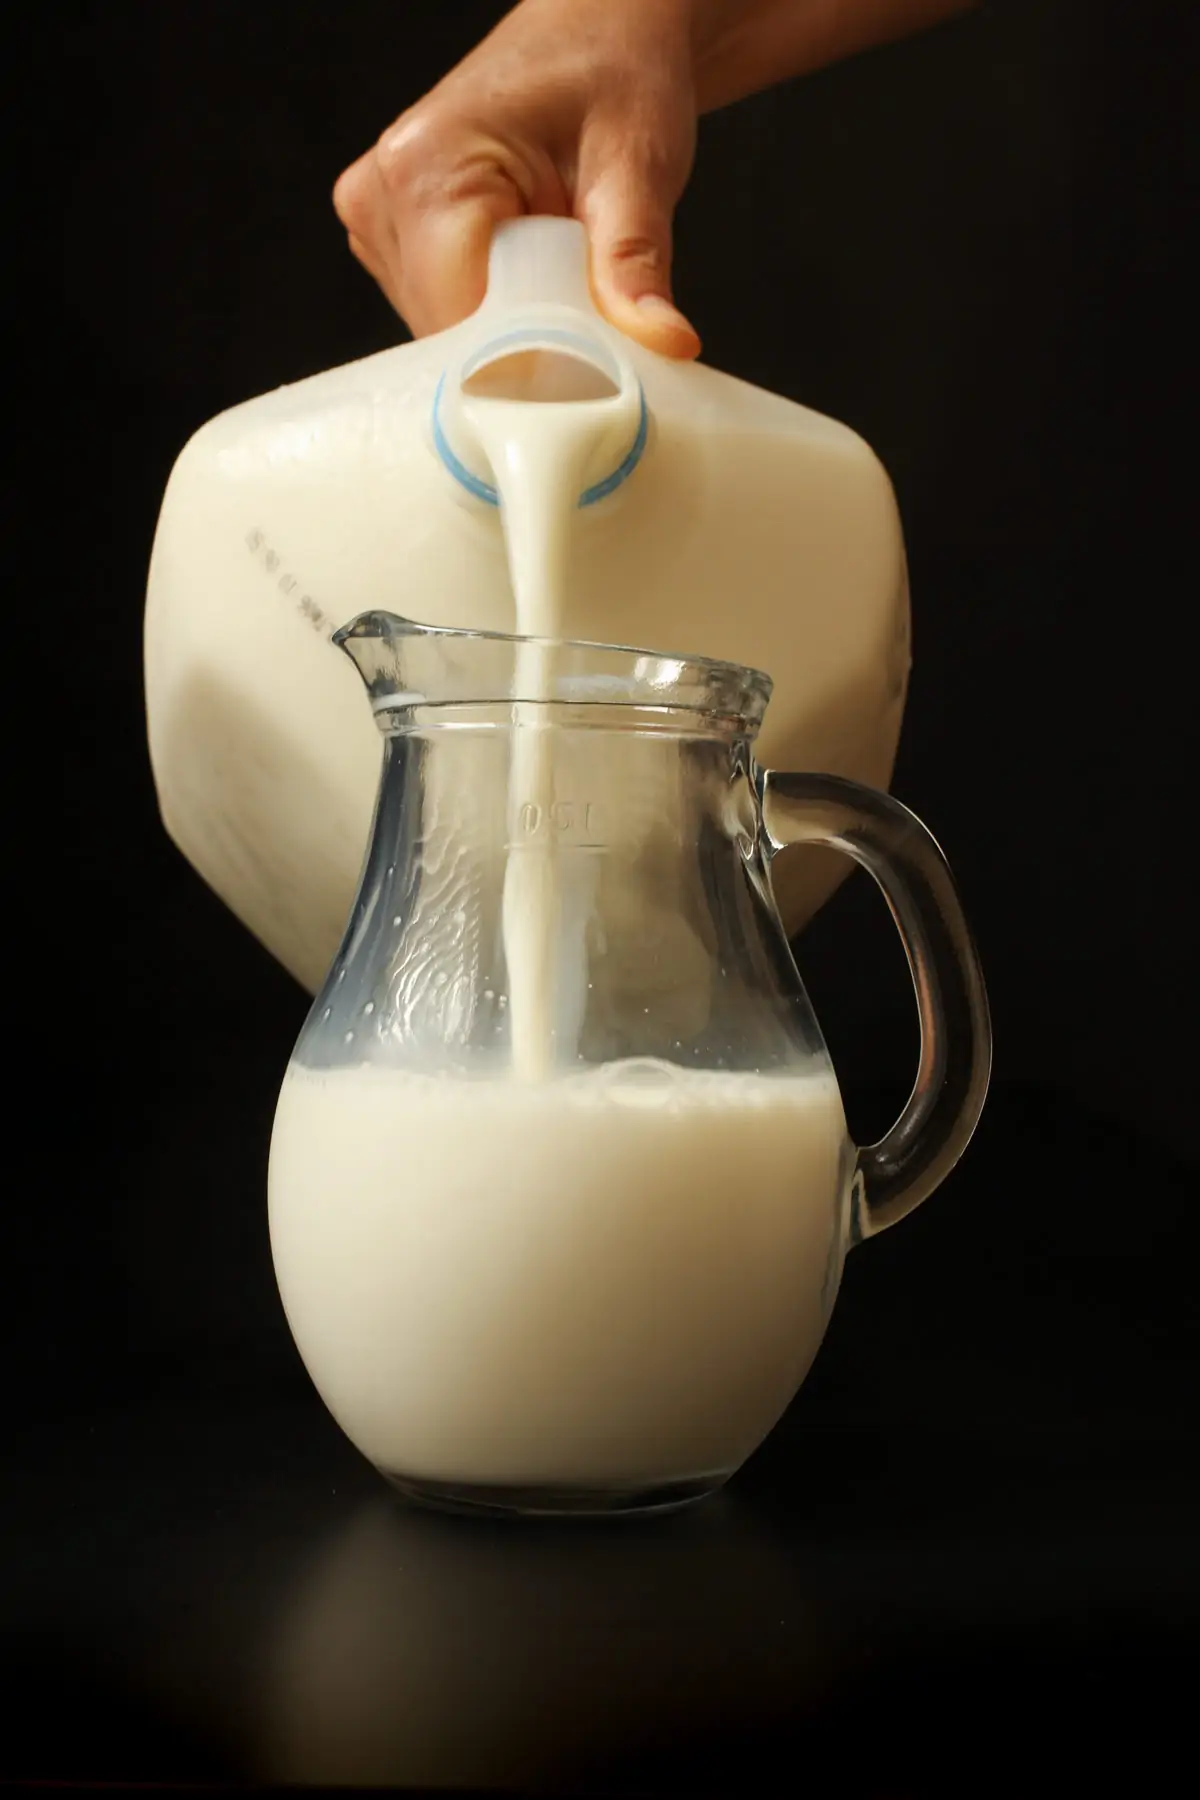 pouring milk out of plastic jug into smaller glass pitcher.